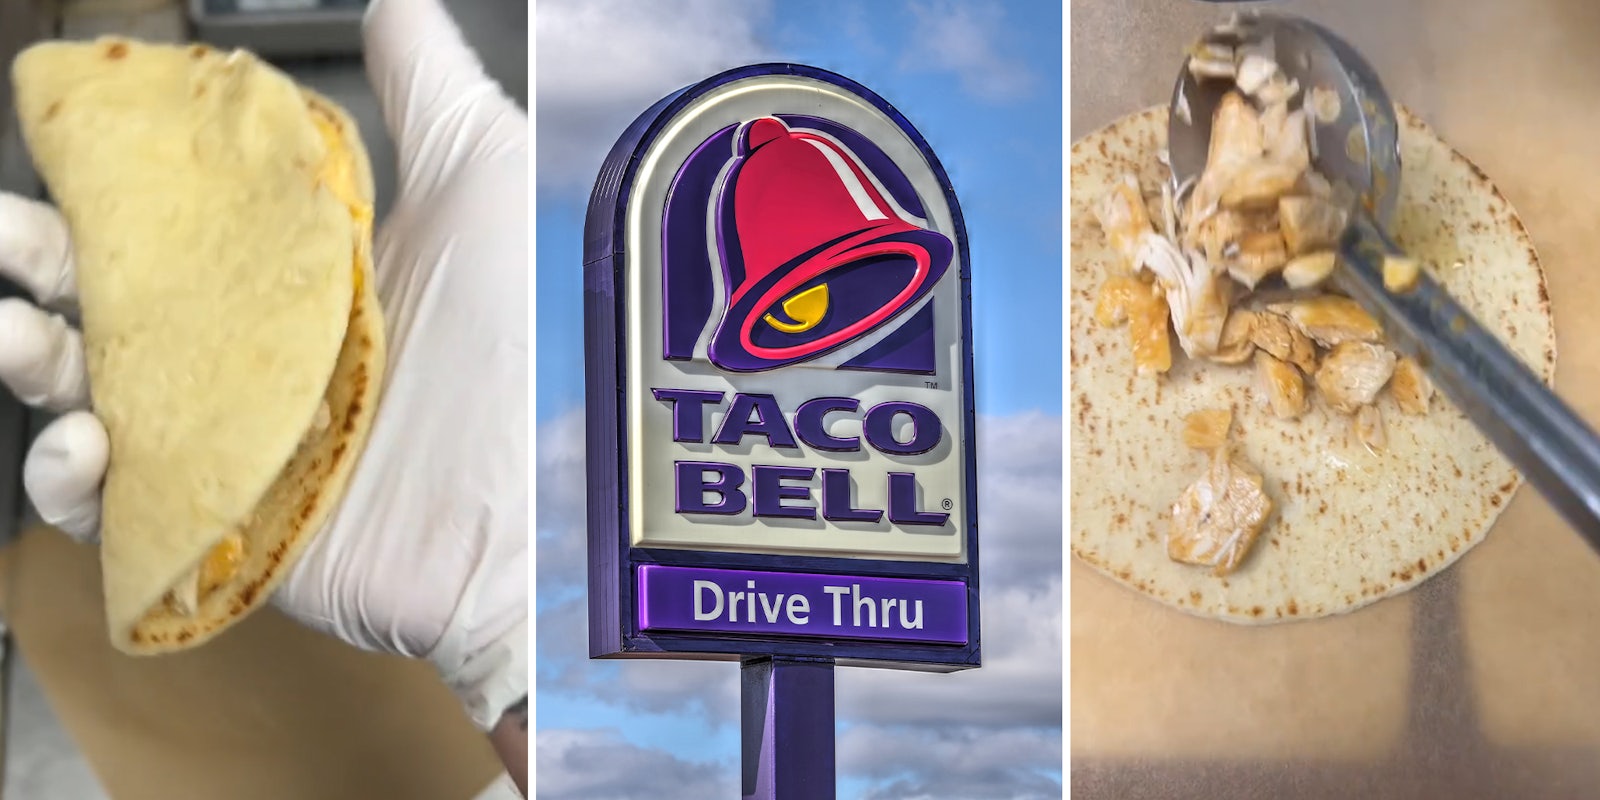 Taco Bell worker gives 'sneak peek' at new item he says is about to hit the menu